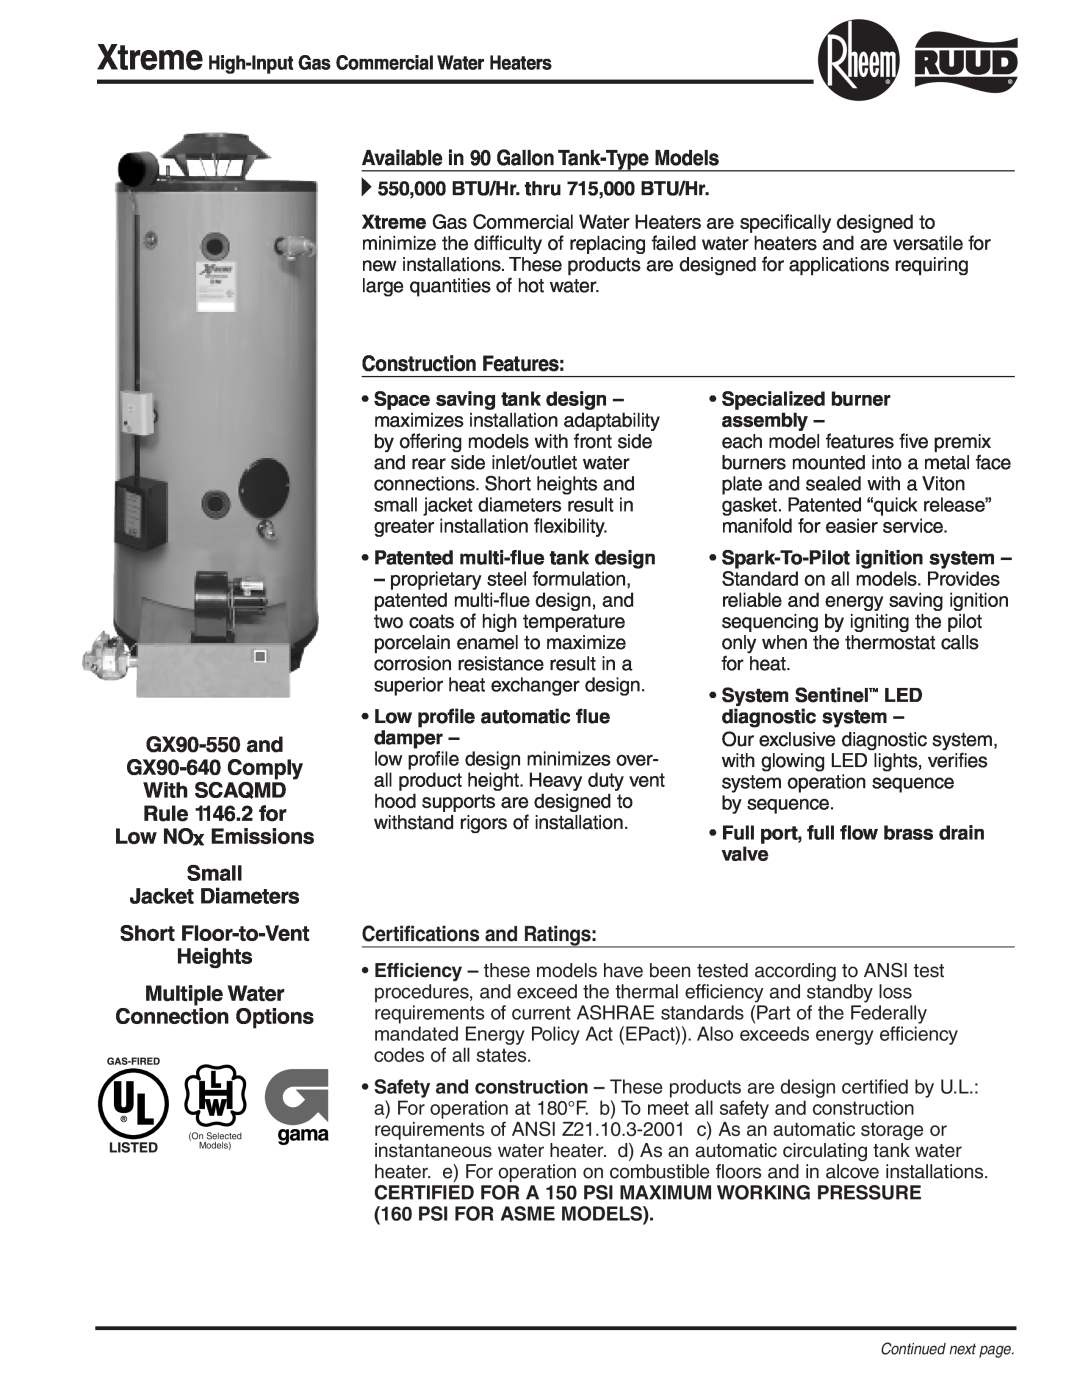 Rheem manual Available in 90 Gallon Tank-Type Models, Construction Features, GX90-550 and GX90-640 Comply 